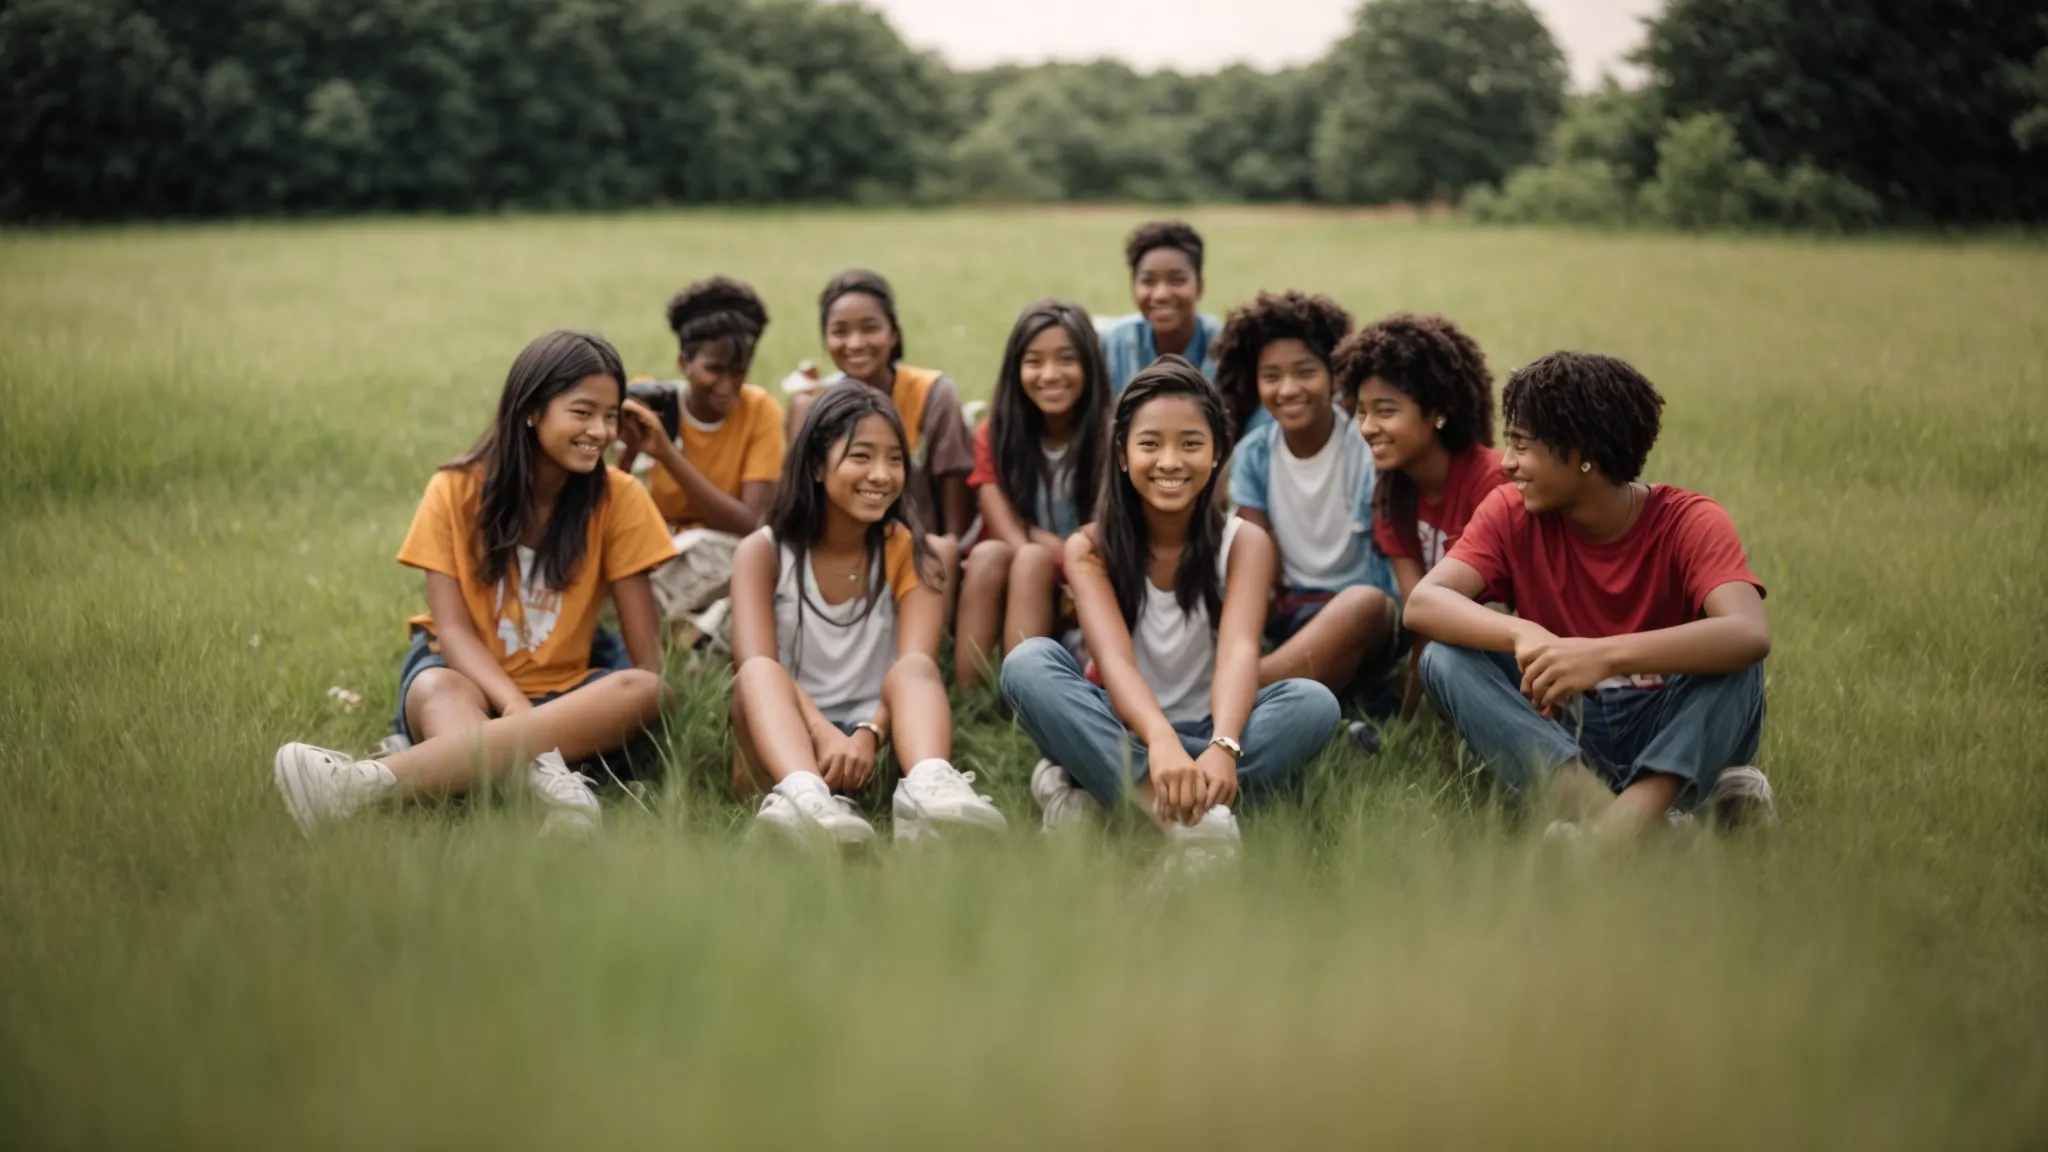 a group of smiling teenagers from various cultural backgrounds are sitting together on a grassy field during a summer school activity.